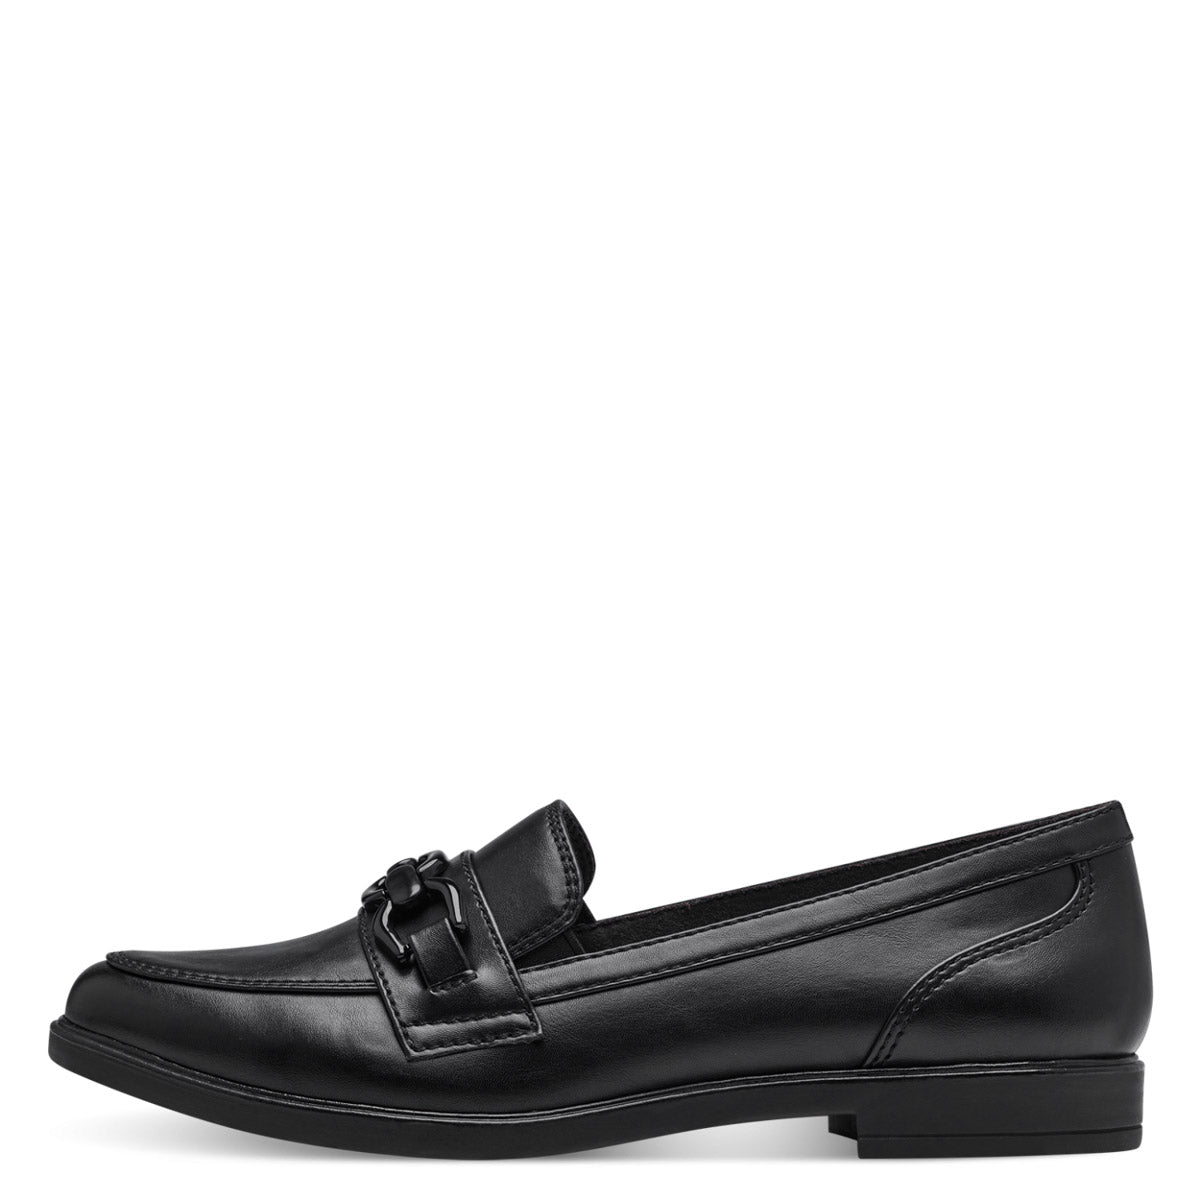 Jana Black Wide-Fit Flat Loafer: Sleek and Cushioned Comfort